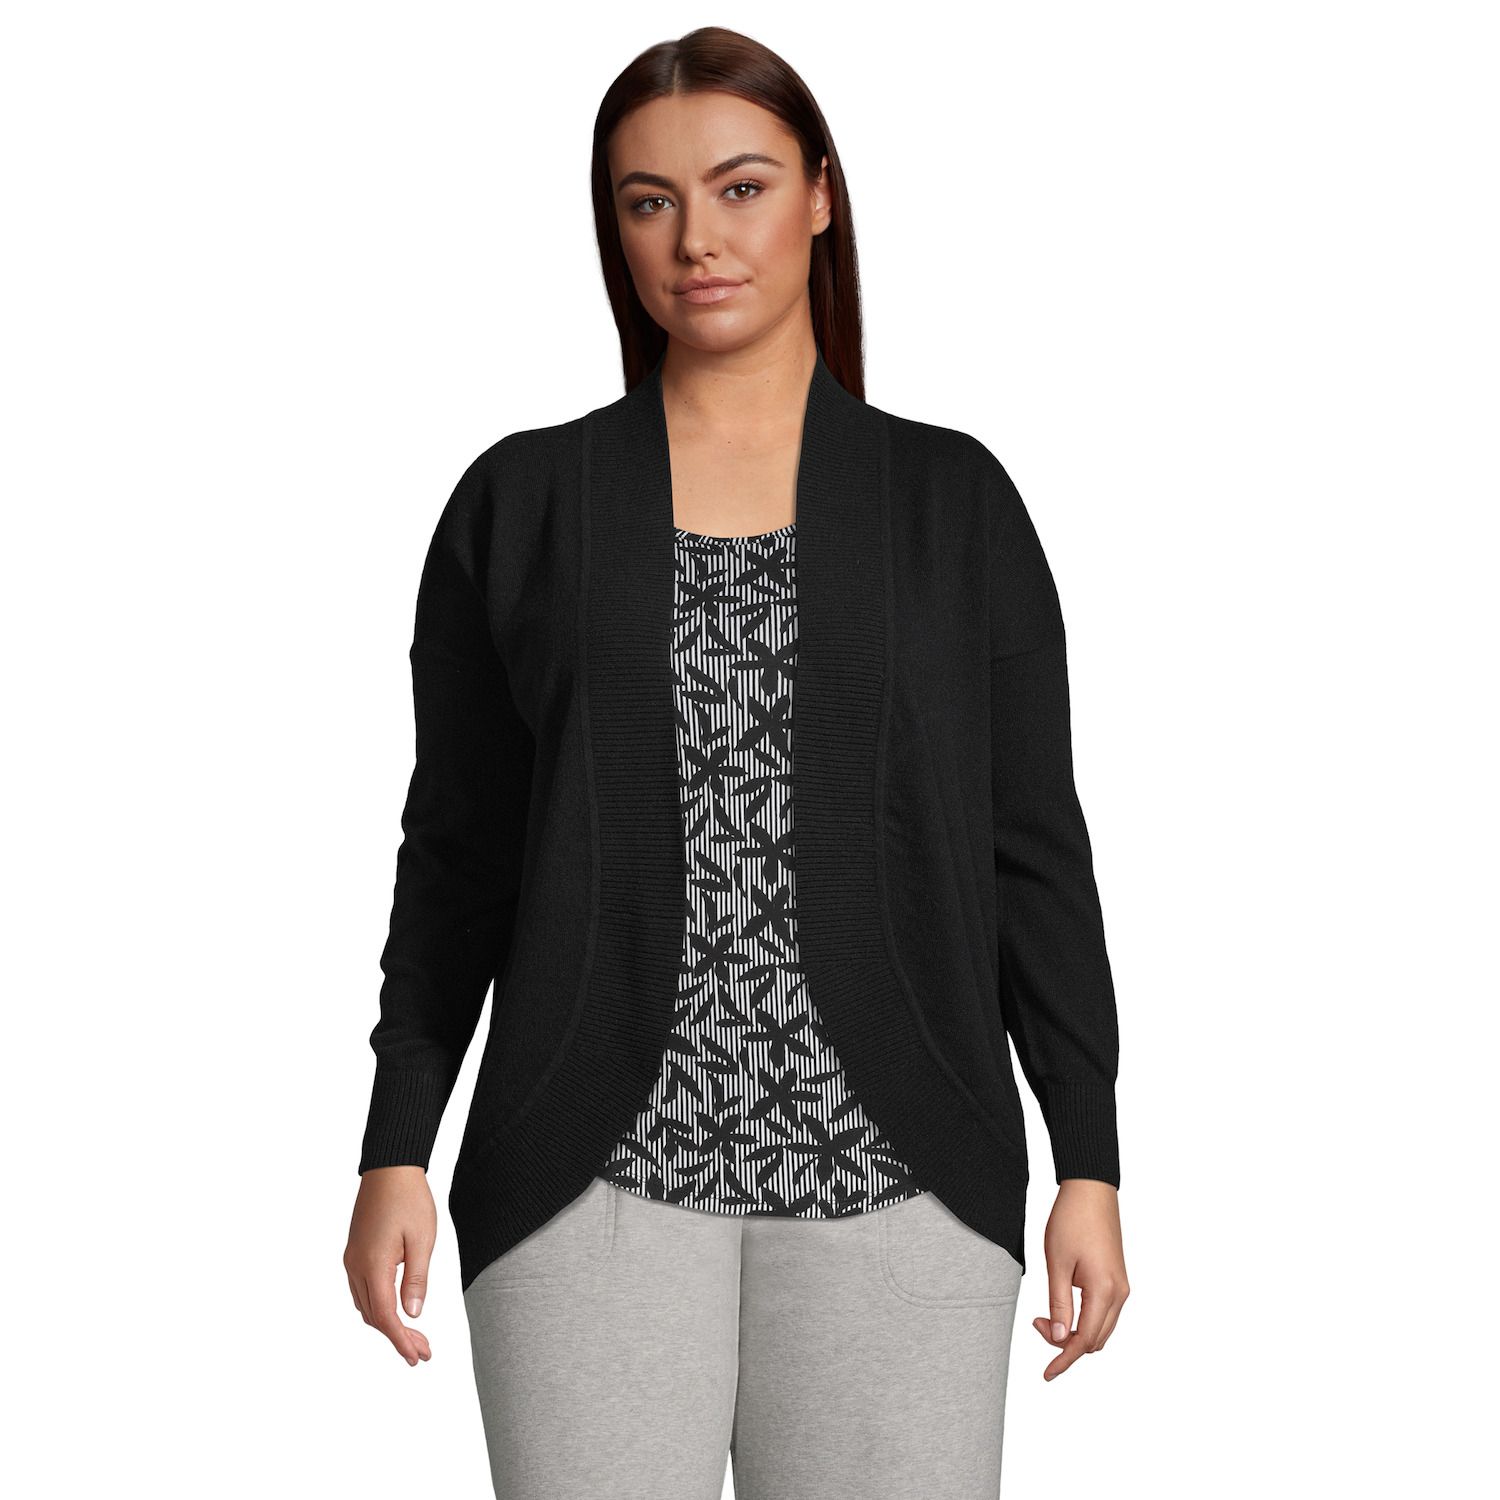 Image for Lands' End Plus Size Cashmere Cocoon Cardigan Sweater at Kohl's.